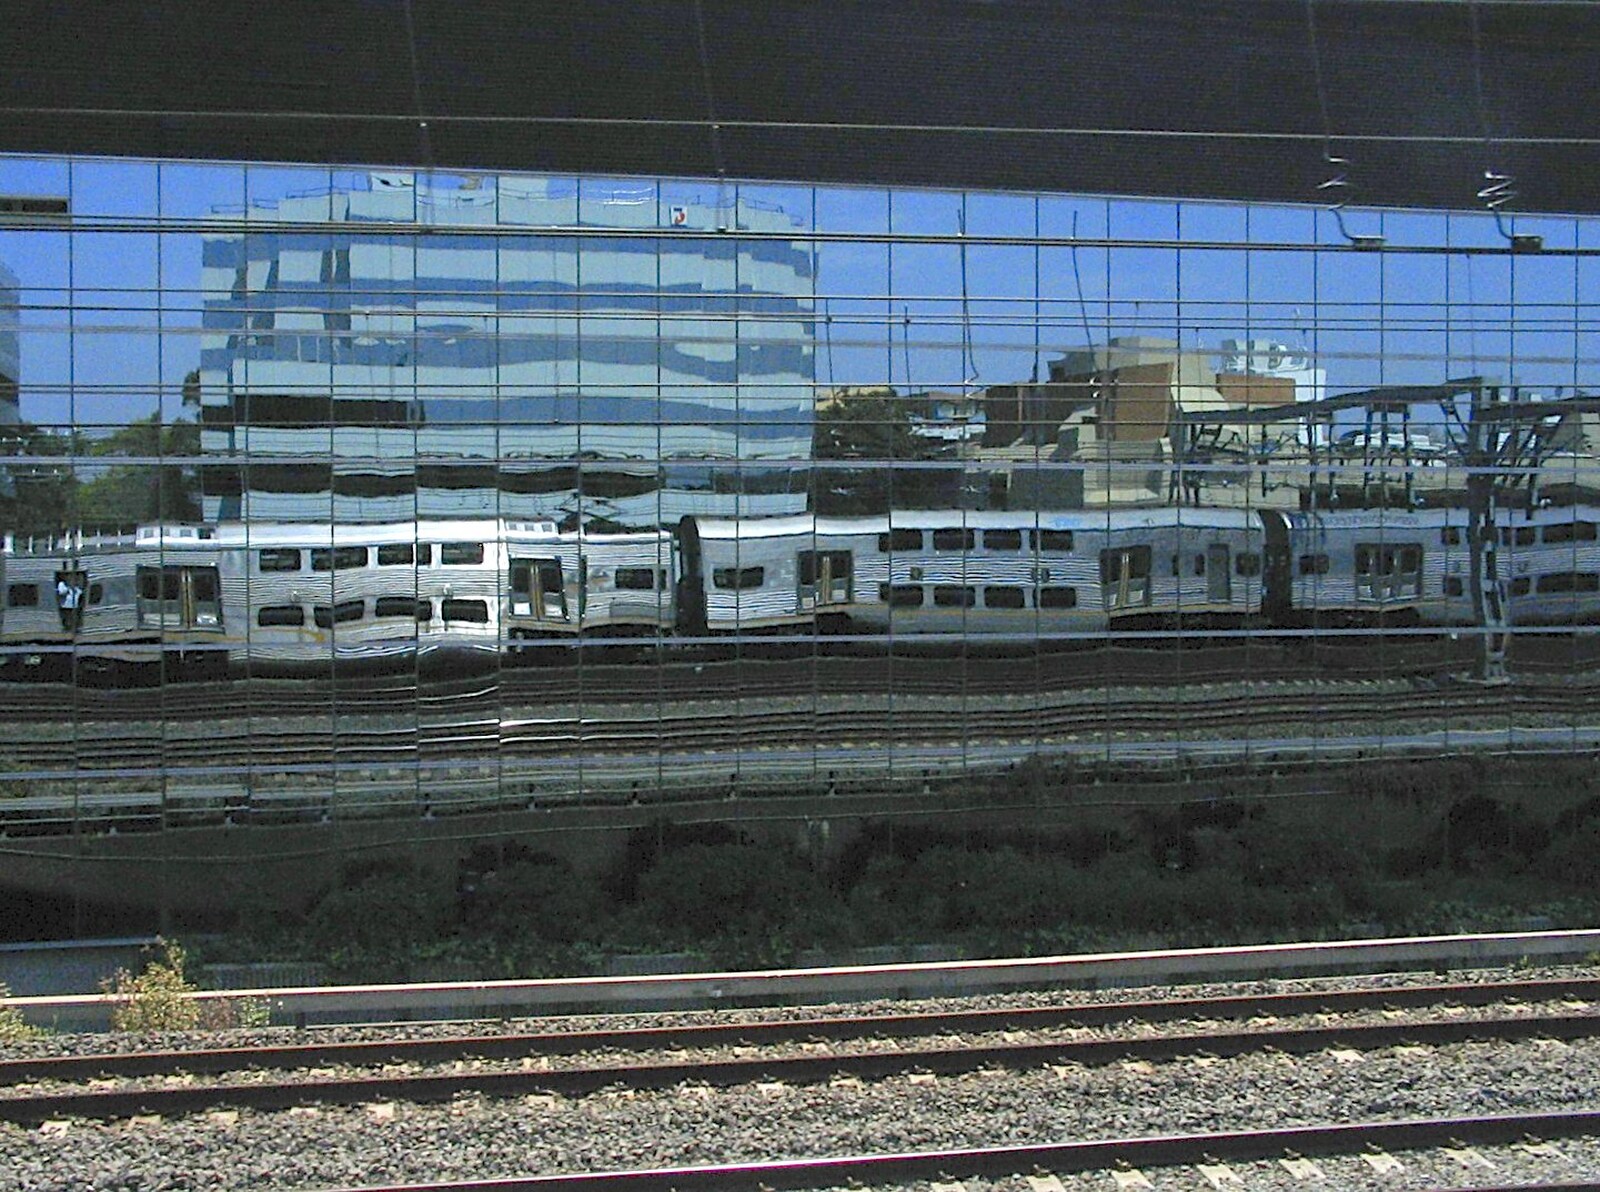 Nosher's train reflected in a building from Sydney, New South Wales, Australia - 10th October 2004